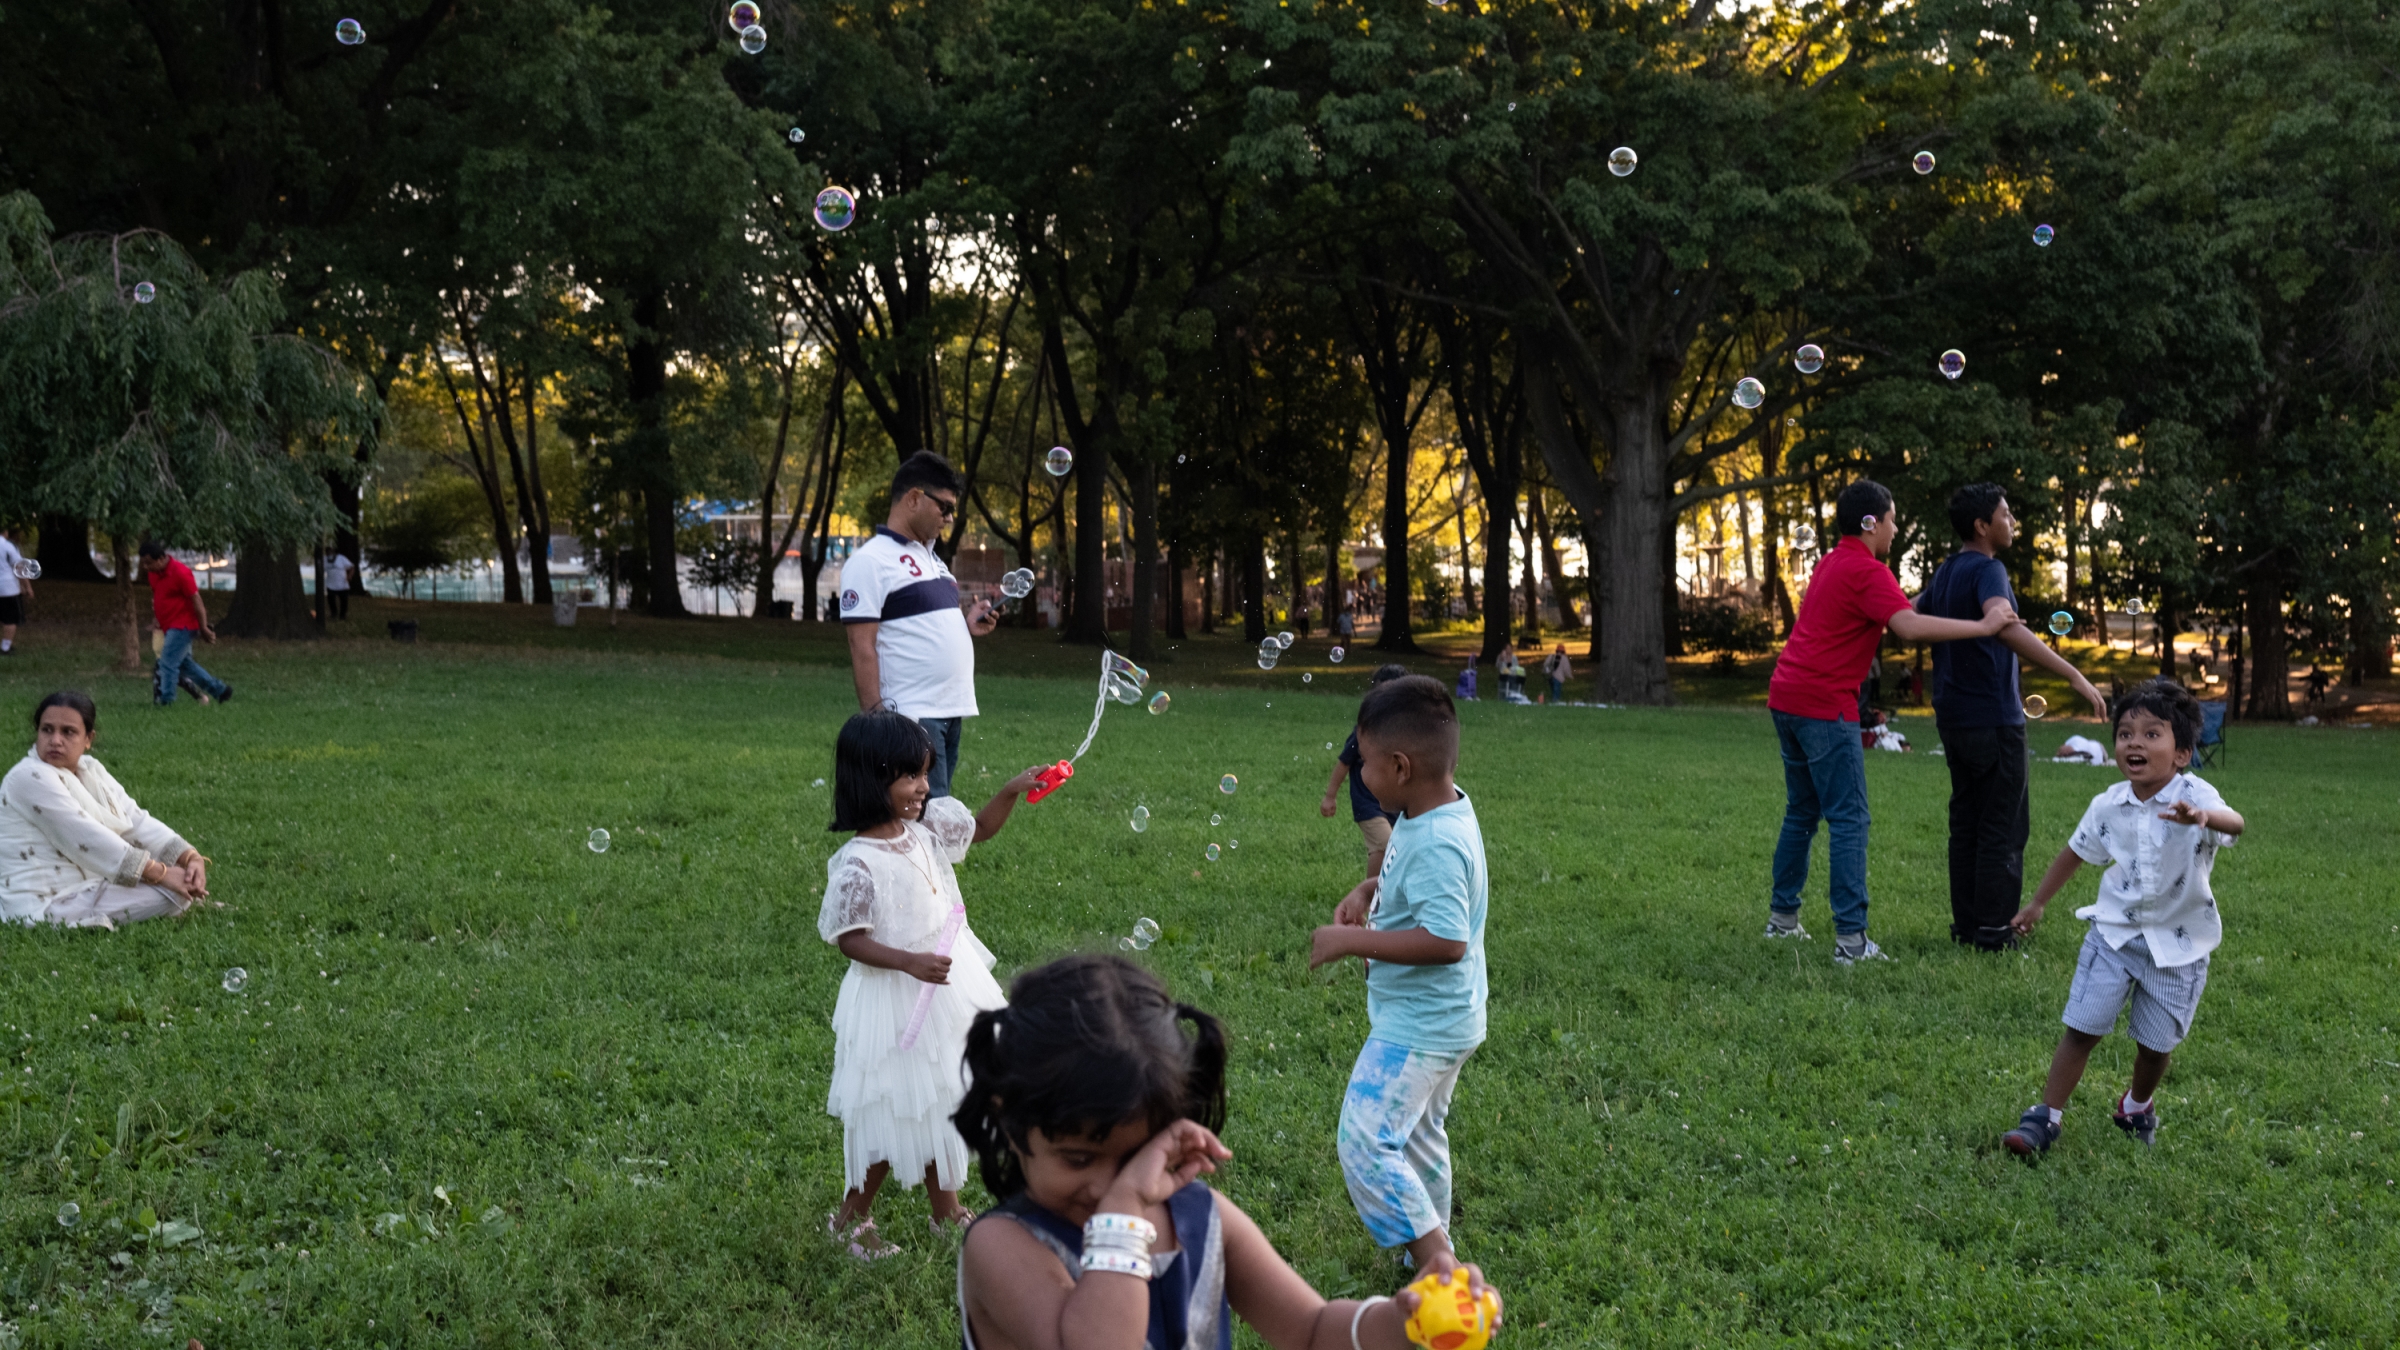 Children play at a picnic organized by the Bangladeshi American community in Astoria Park, Queens, on August 14, 2022.